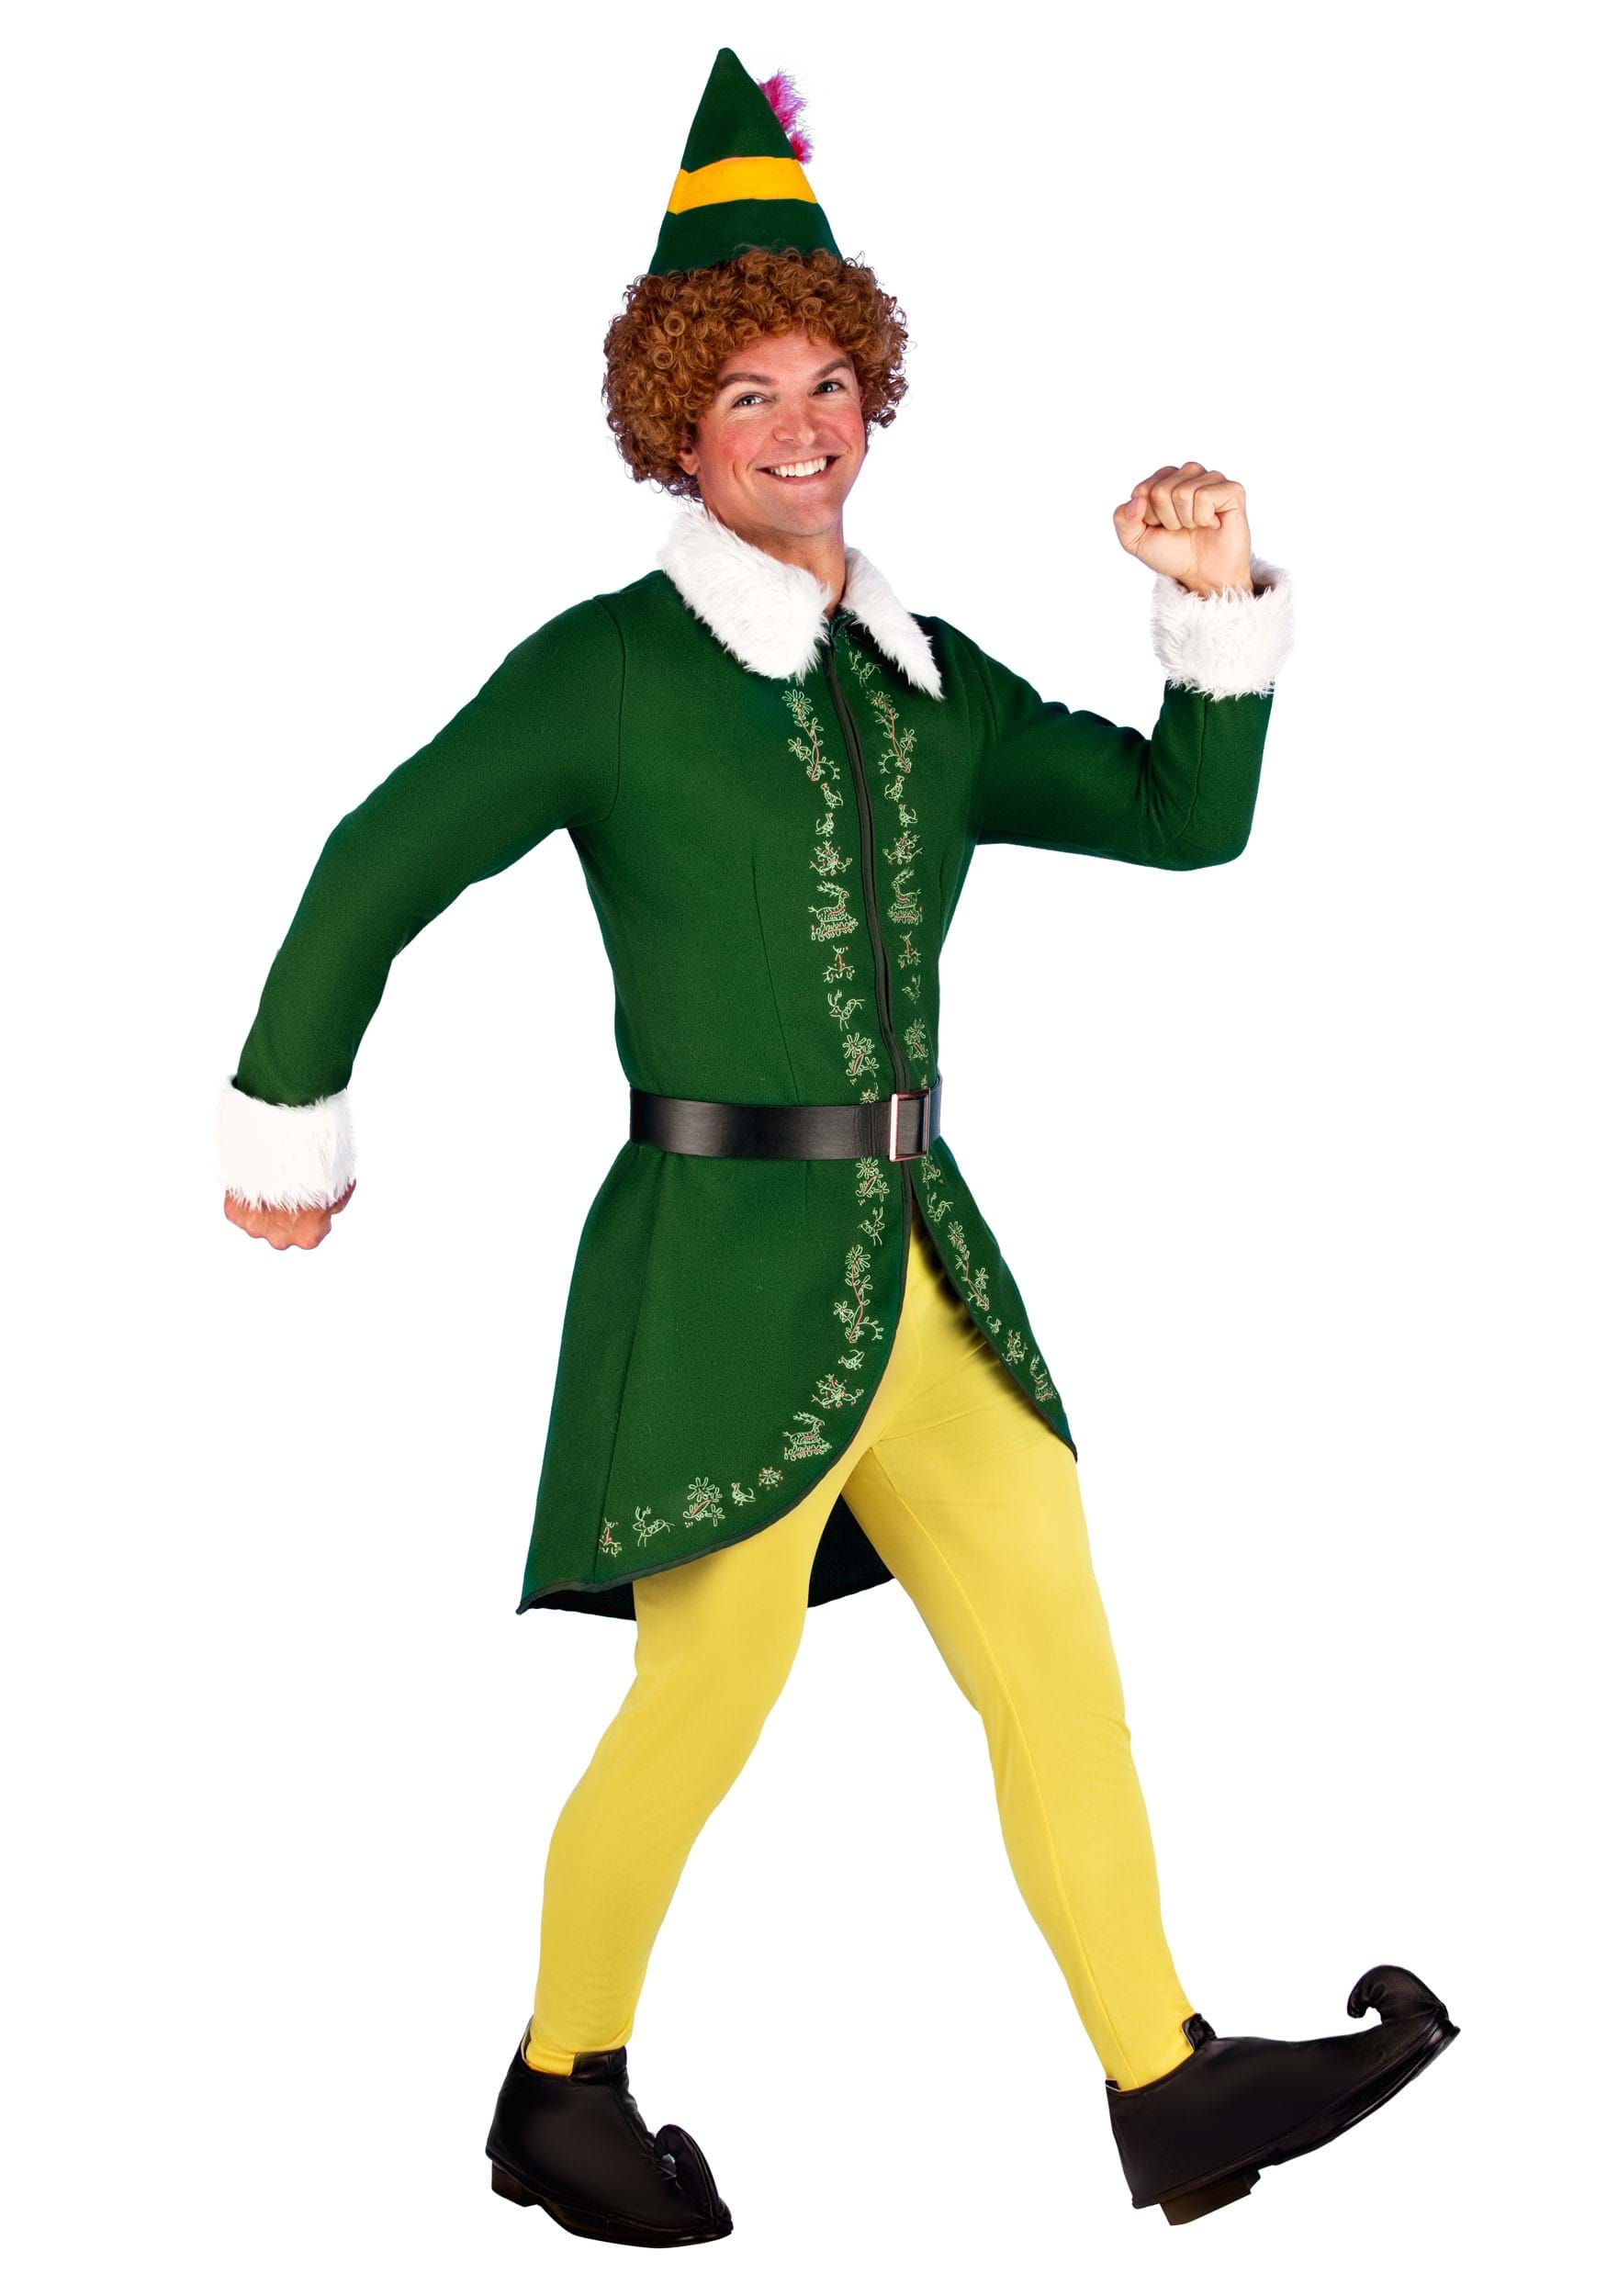 Photos - Fancy Dress Buddy FUN Costumes Authentic Adult  the Elf Outfit Green/White/Yell 